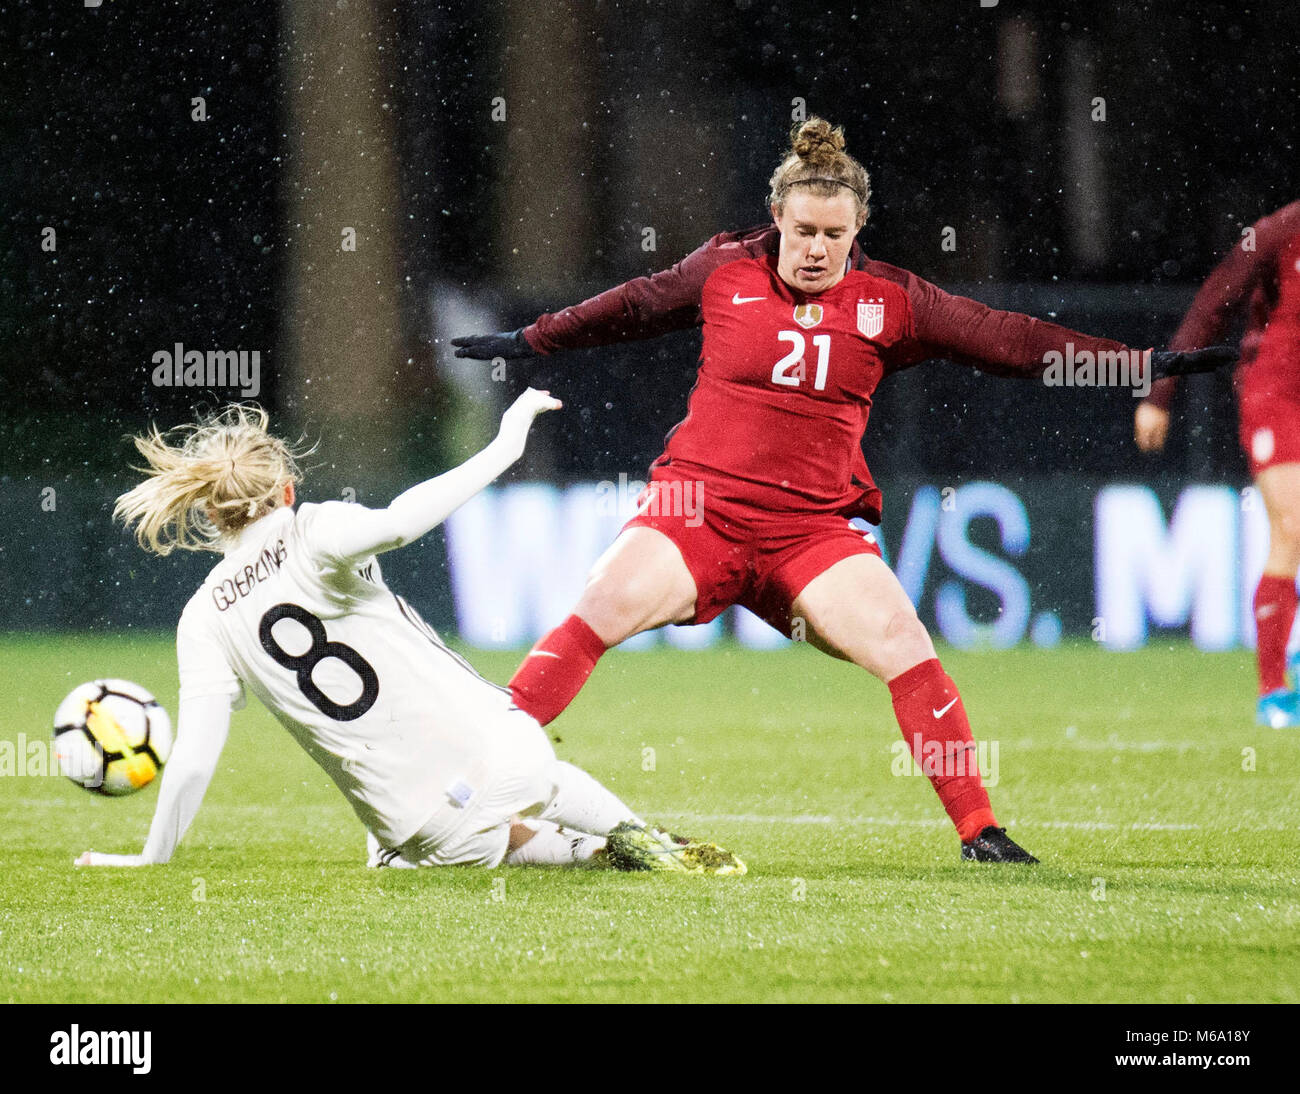 Columbus, Ohio, USA. March 1, 2018: USA forward Savannah McCaskill (21) fights for the ball against Germany midfielder Lena Goessling (8) during their match at the SheBelieves Cup in Columbus, Ohio, USA. Brent Clark/Alamy Live  News Stock Photo